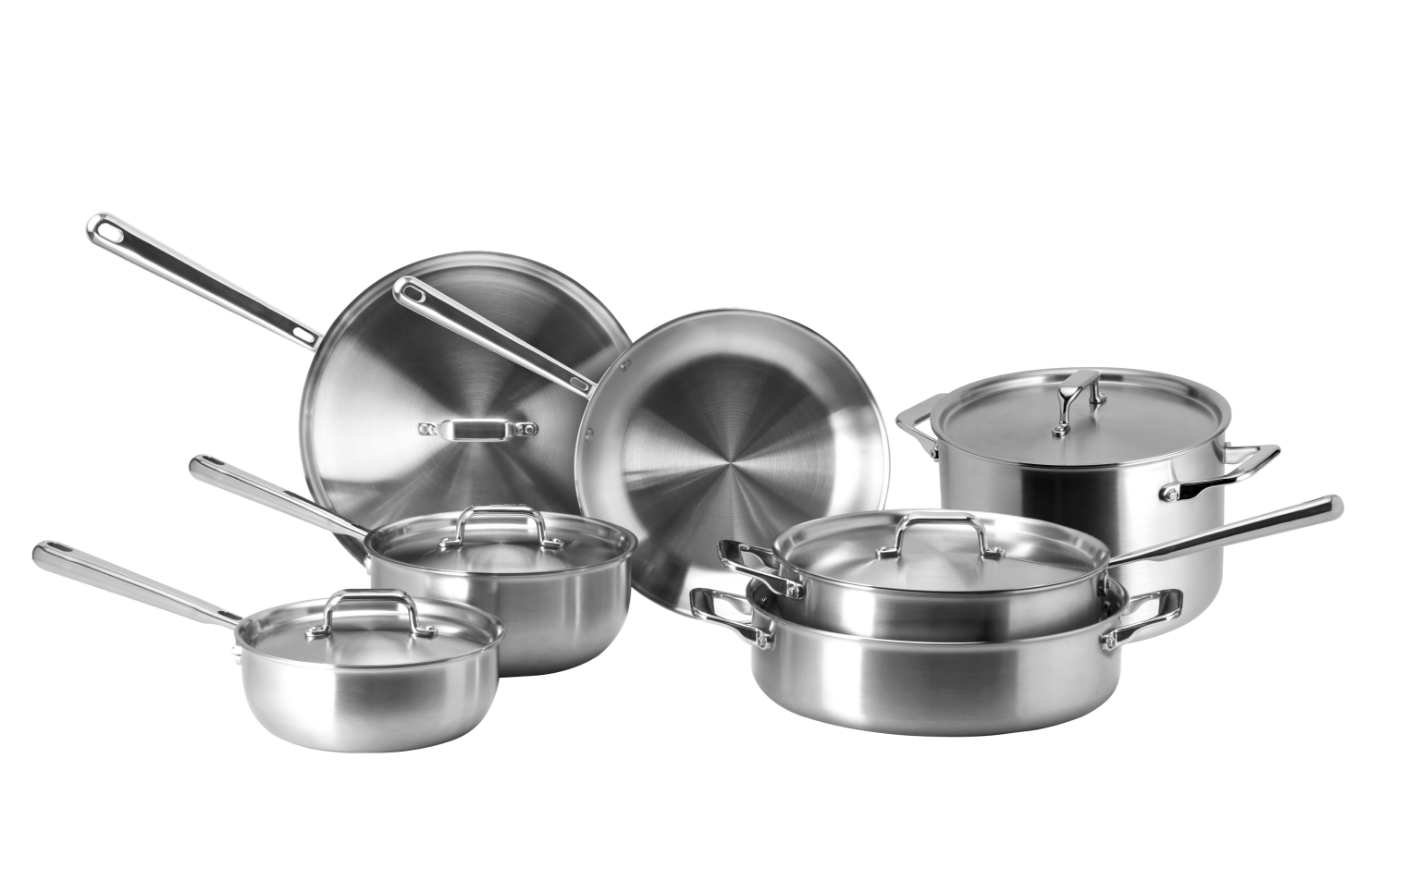 Shop now with your special discount for the Misen Complete Cookware Set!